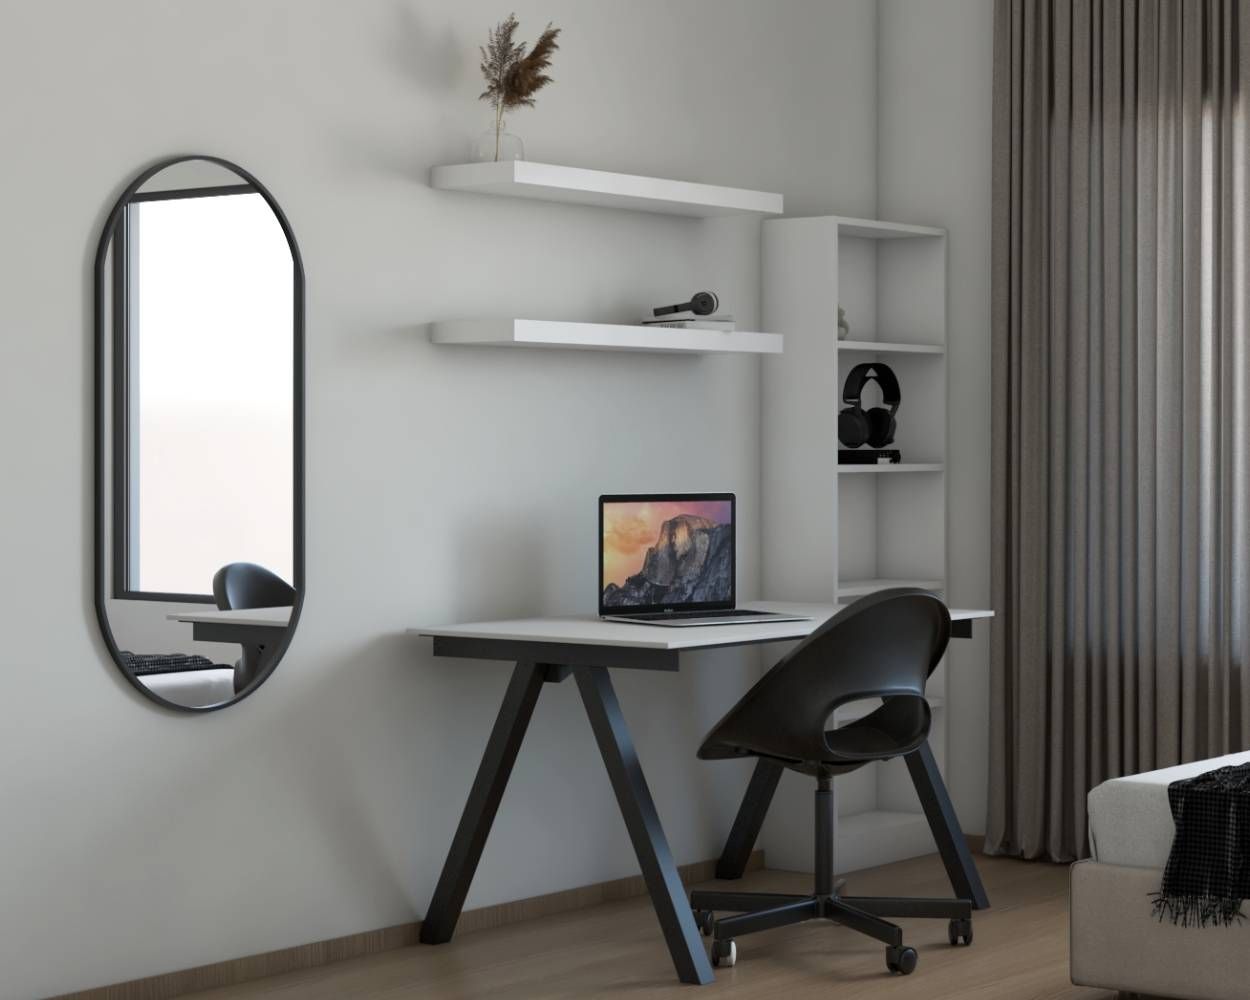 Minimal Black And White Home Office Design With Black-Framed Oval Mirror